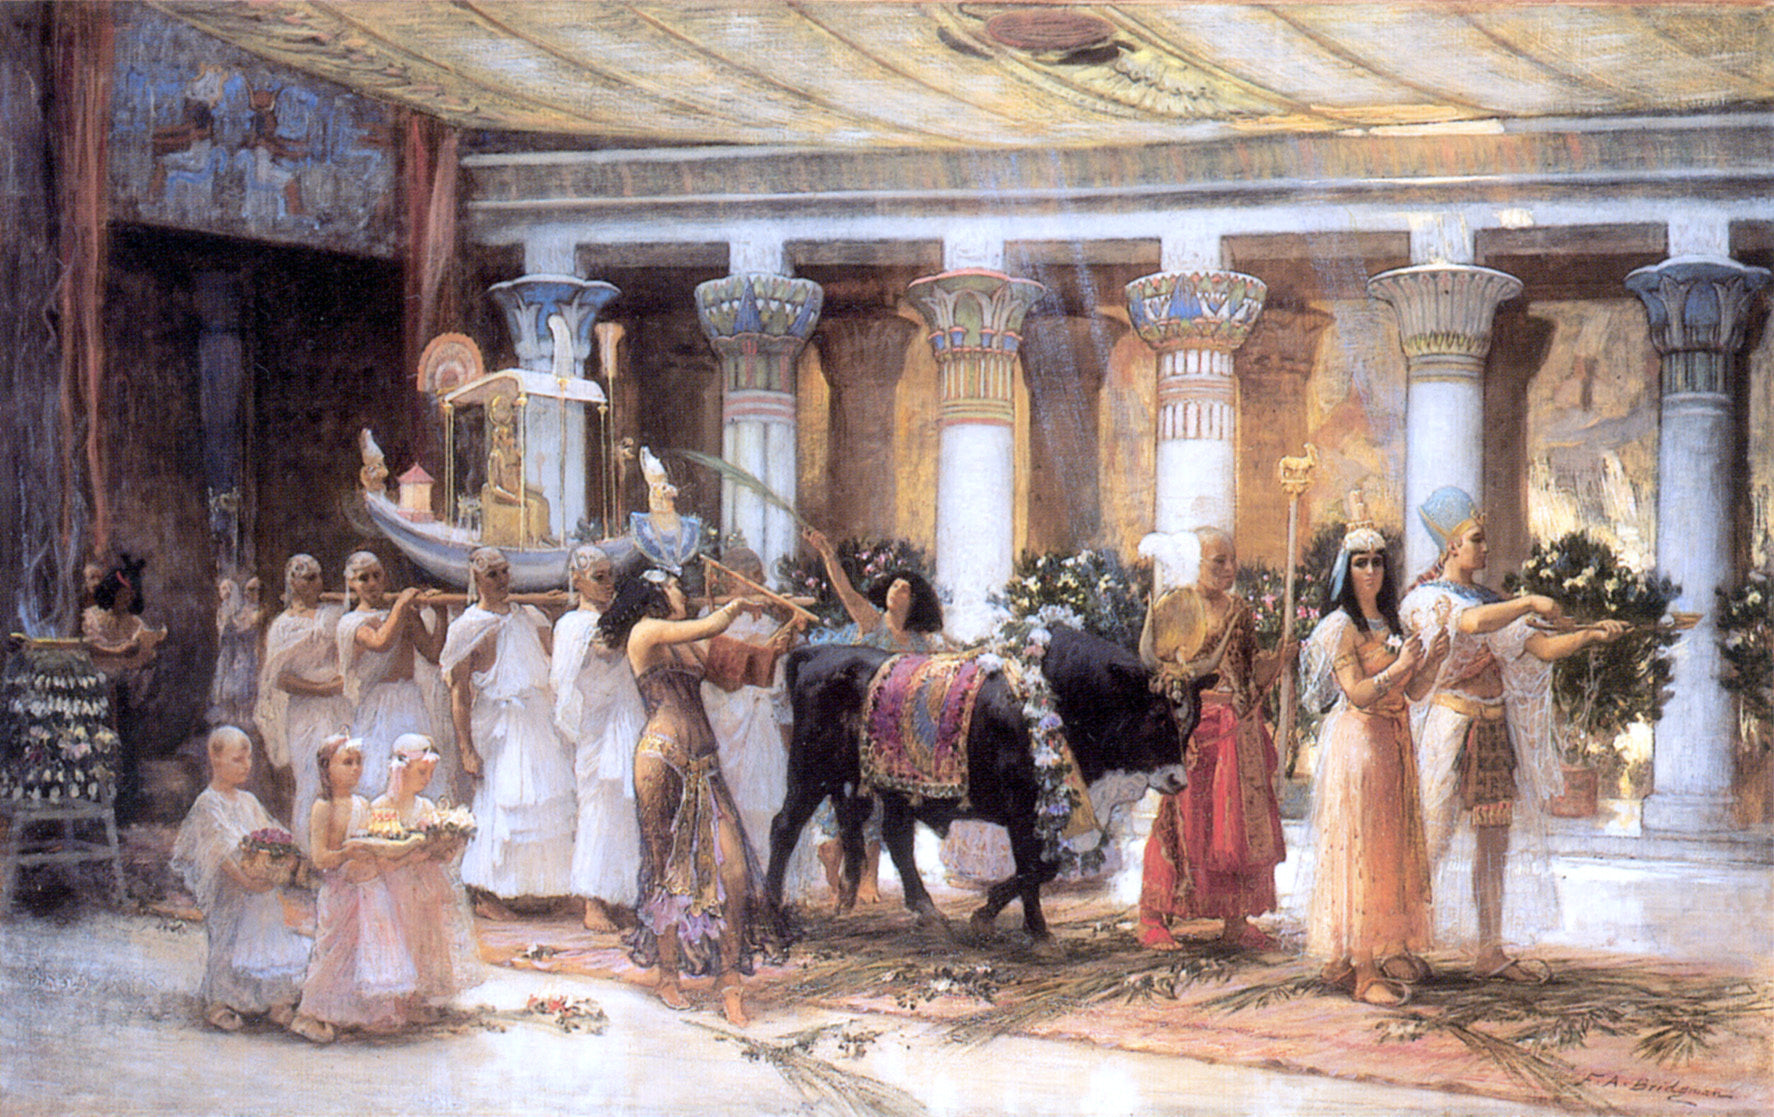  Frederick Arthur Bridgman The Procession of the Sacred Bull Anubis - Hand Painted Oil Painting